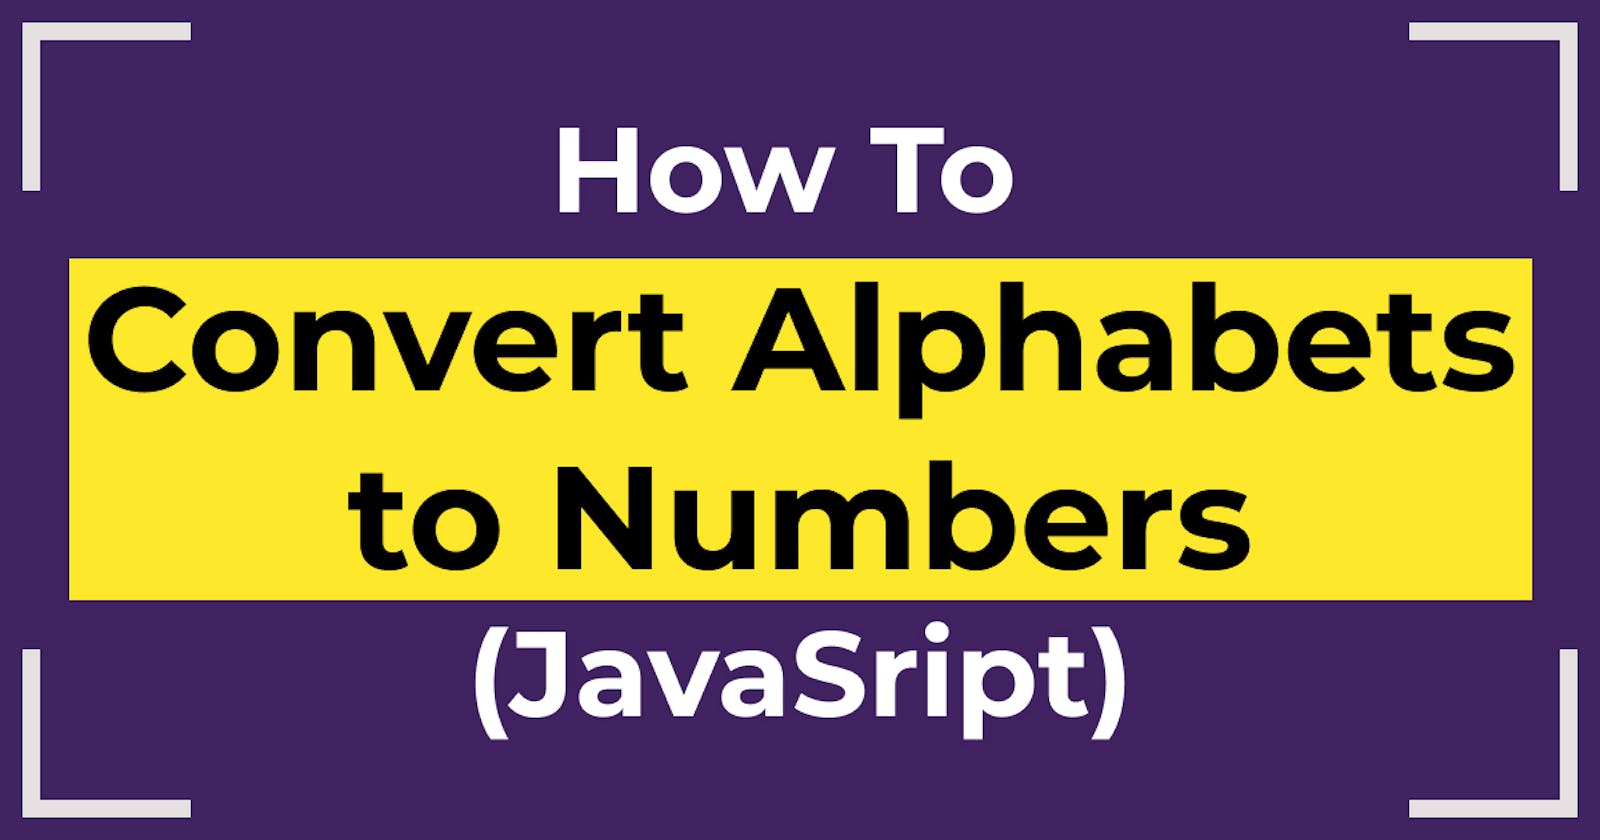 How to Convert Alphabets to Numbers (and vice versa) in JavaScript